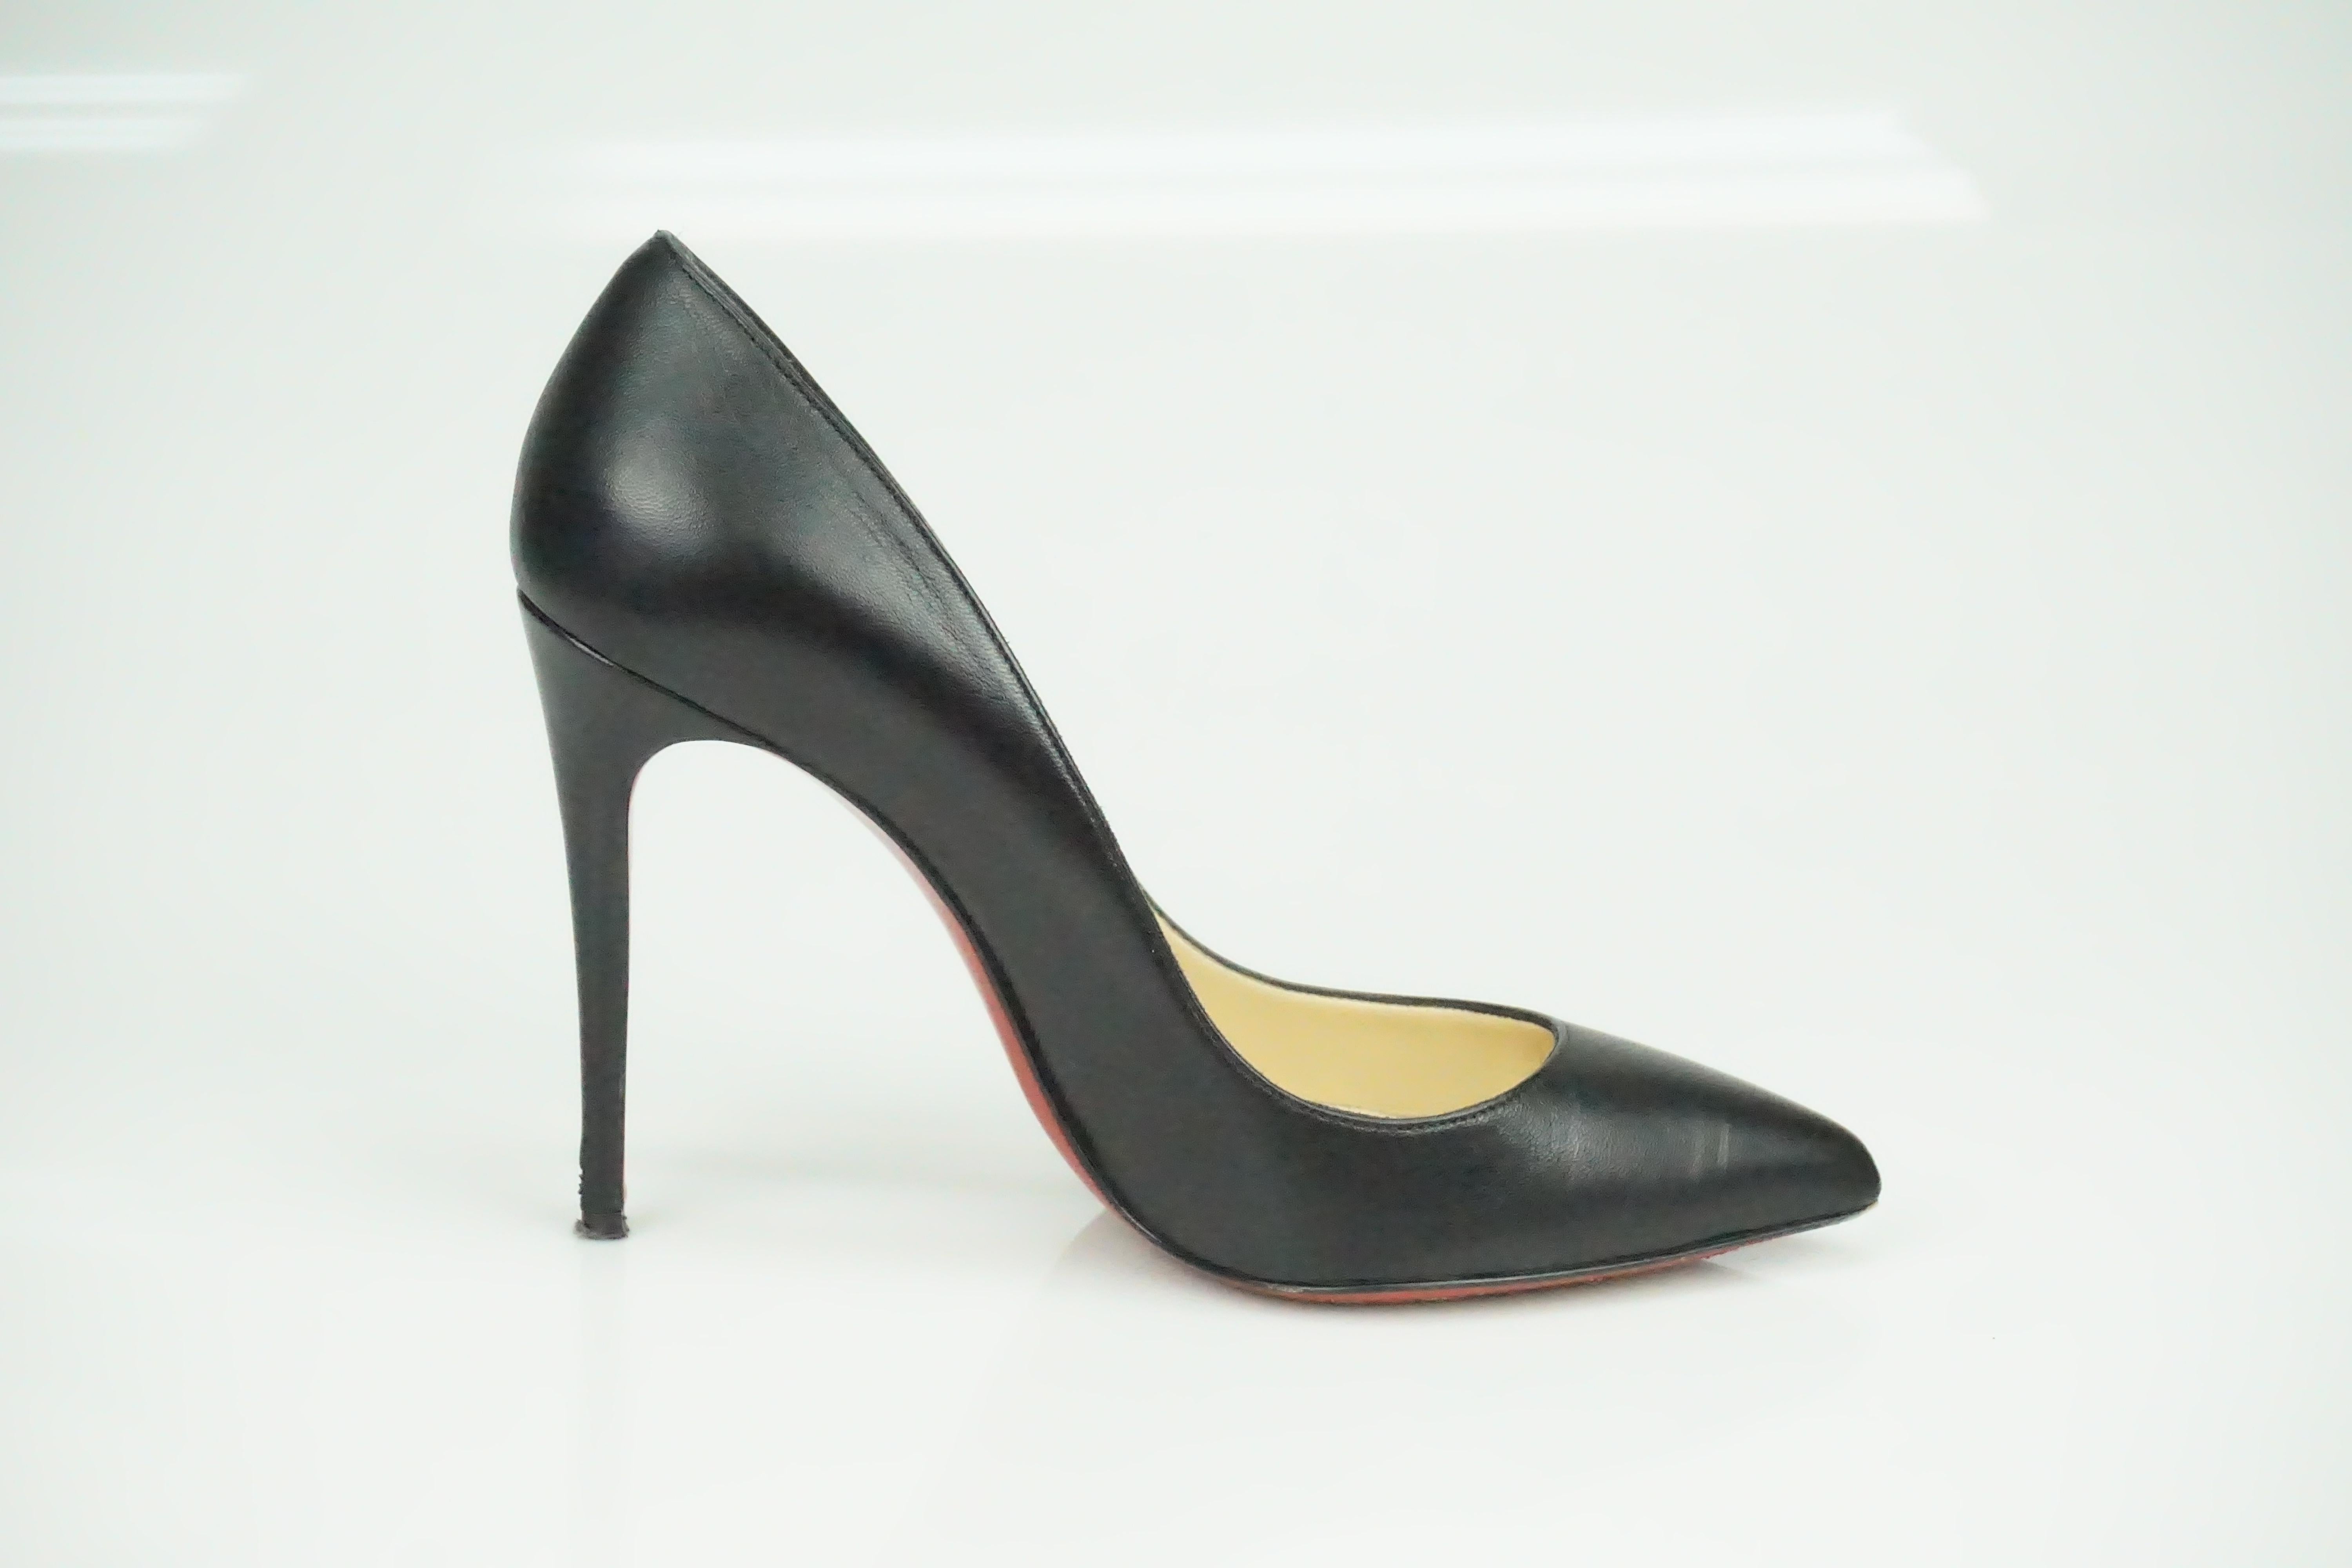 Christian Louboutin Black Leather Pumps w/ Pointed Toe - 36.5  These gorgeous heels are in good condition. They have some wear to them on the bottom near the toe area. The inside sole also has some wear to it as well. The black leather has no scuffs